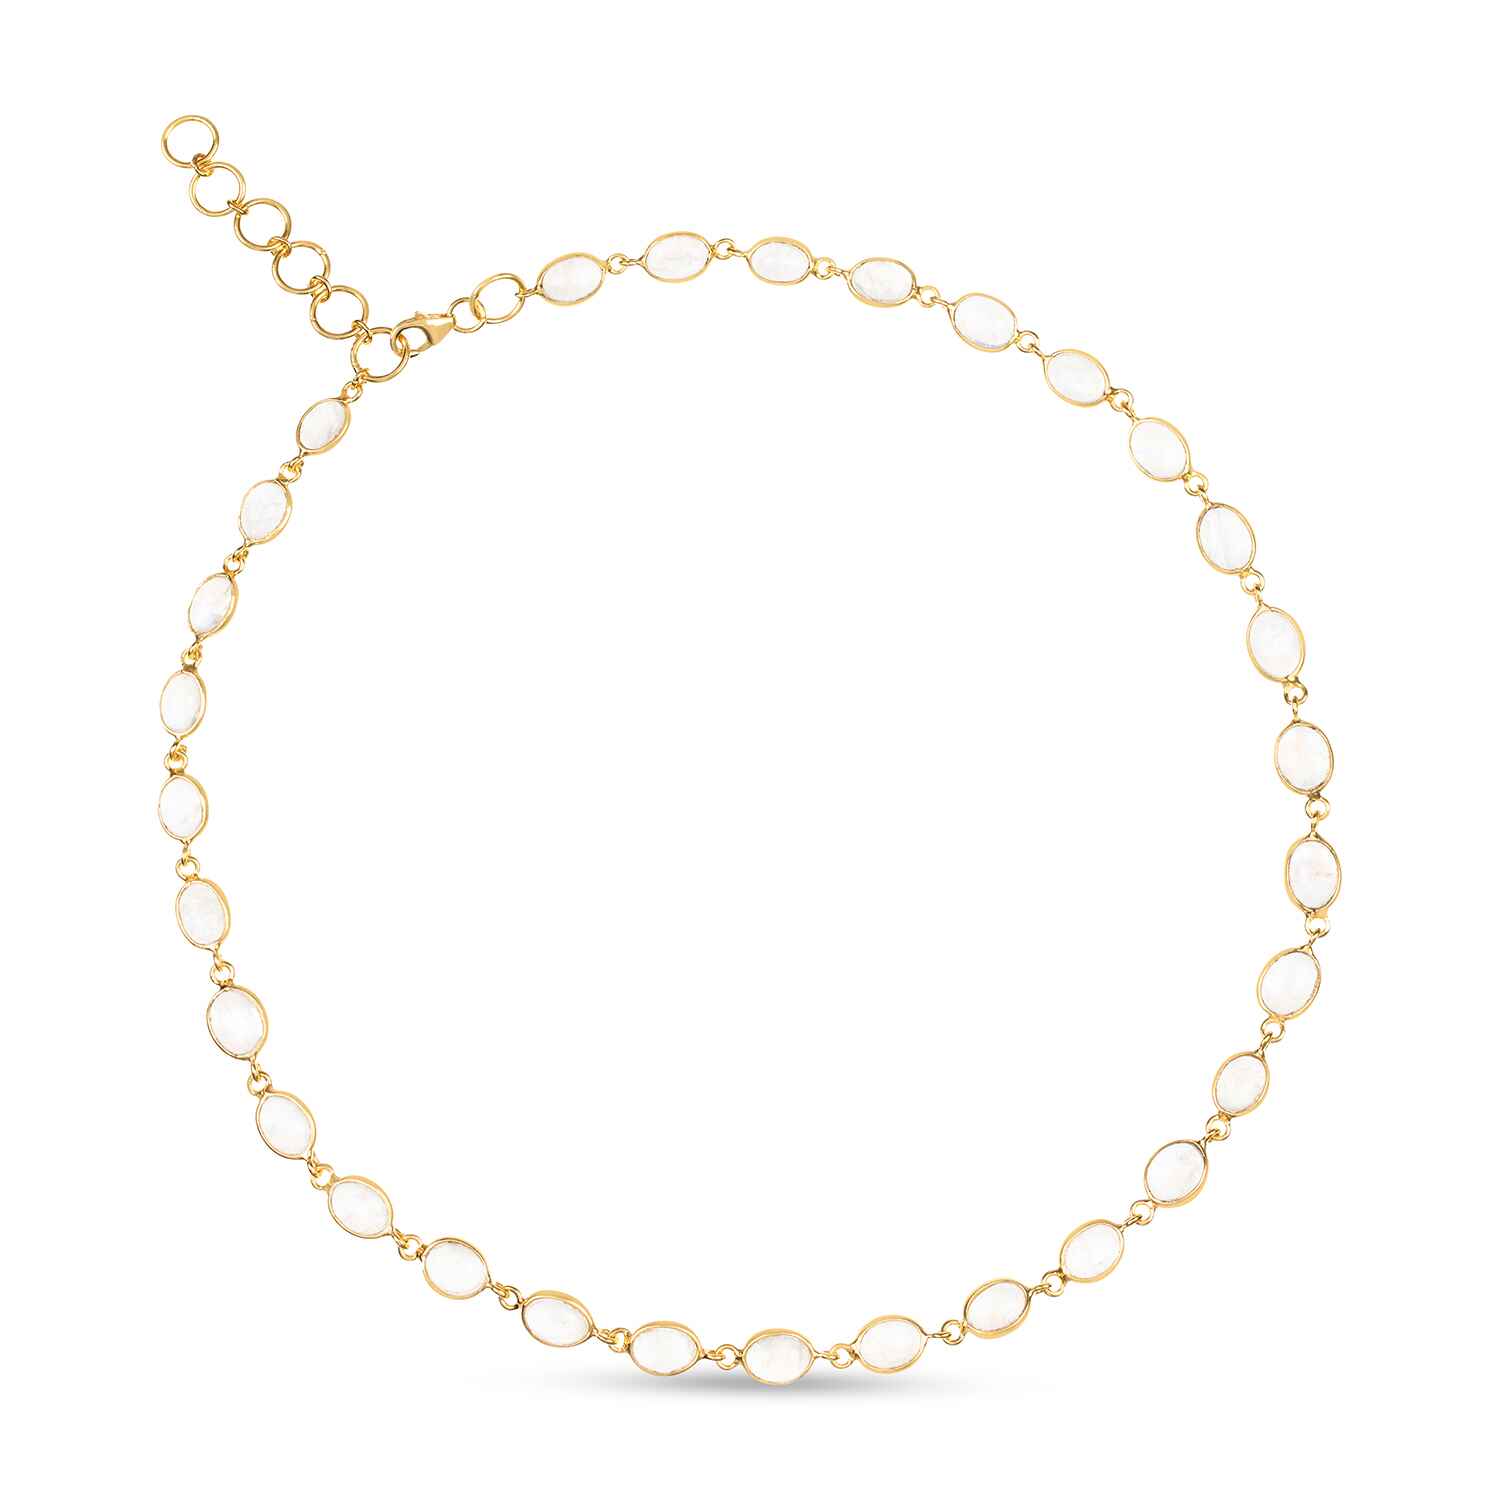 The Luna Moonstone Gold Chain Necklace is a sustainable necklace to keep for every season. On a recycled 18k gold chain, this features stunning vintage gemstones that may be worn as a chocker or extended to a longer version.